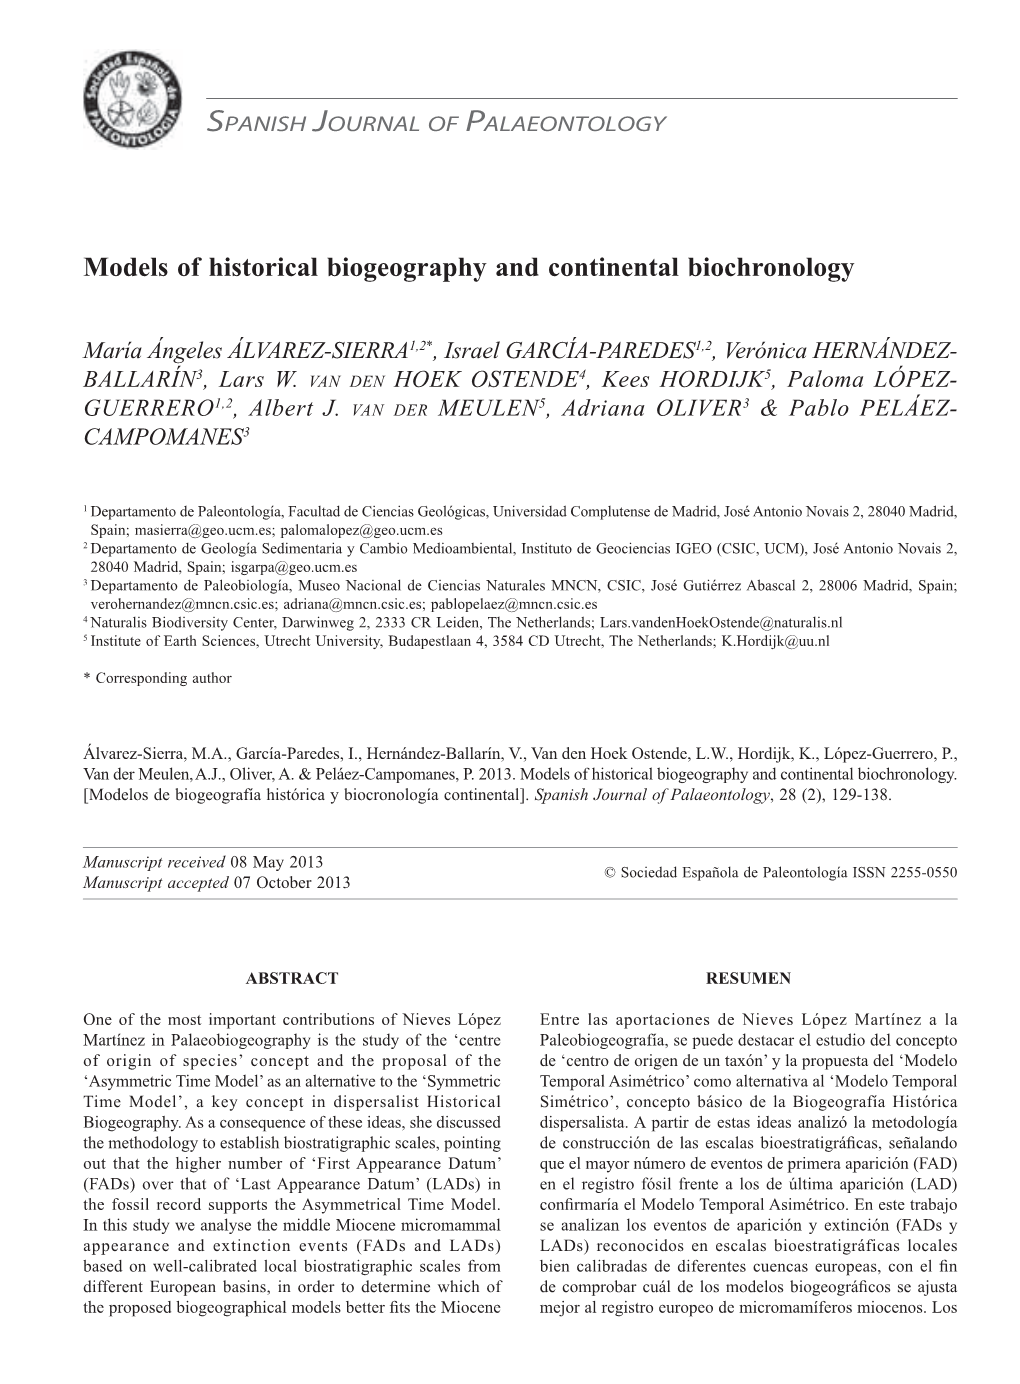 Models of Historical Biogeography and Continental Biochronology